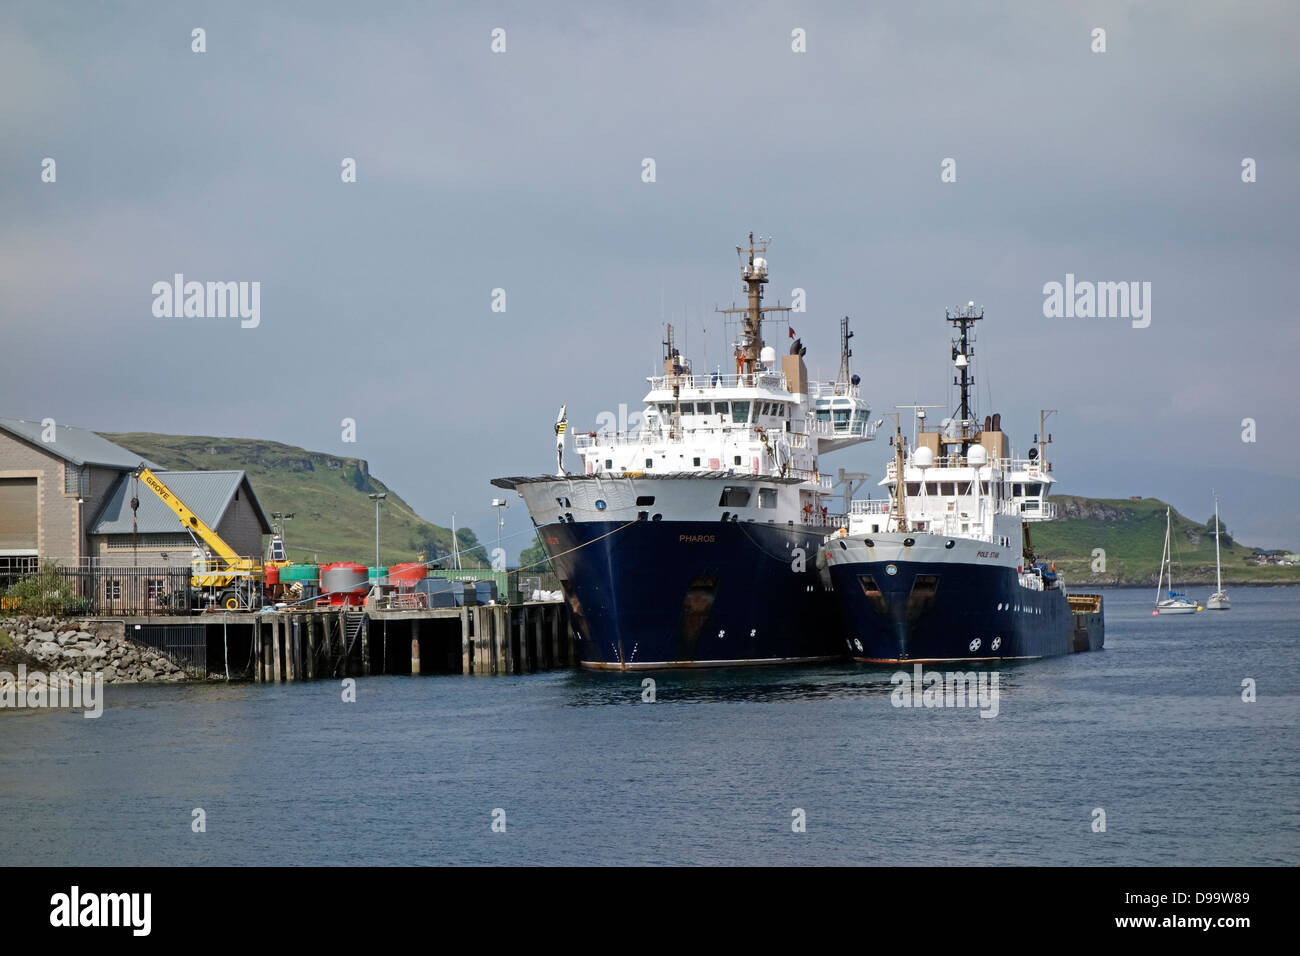 Northern Lighthouse Board lighthouse Tenders NLV Pharos  & NLV Pole Star moored at Operating Base Oban in Oban harbour Scotland Stock Photo